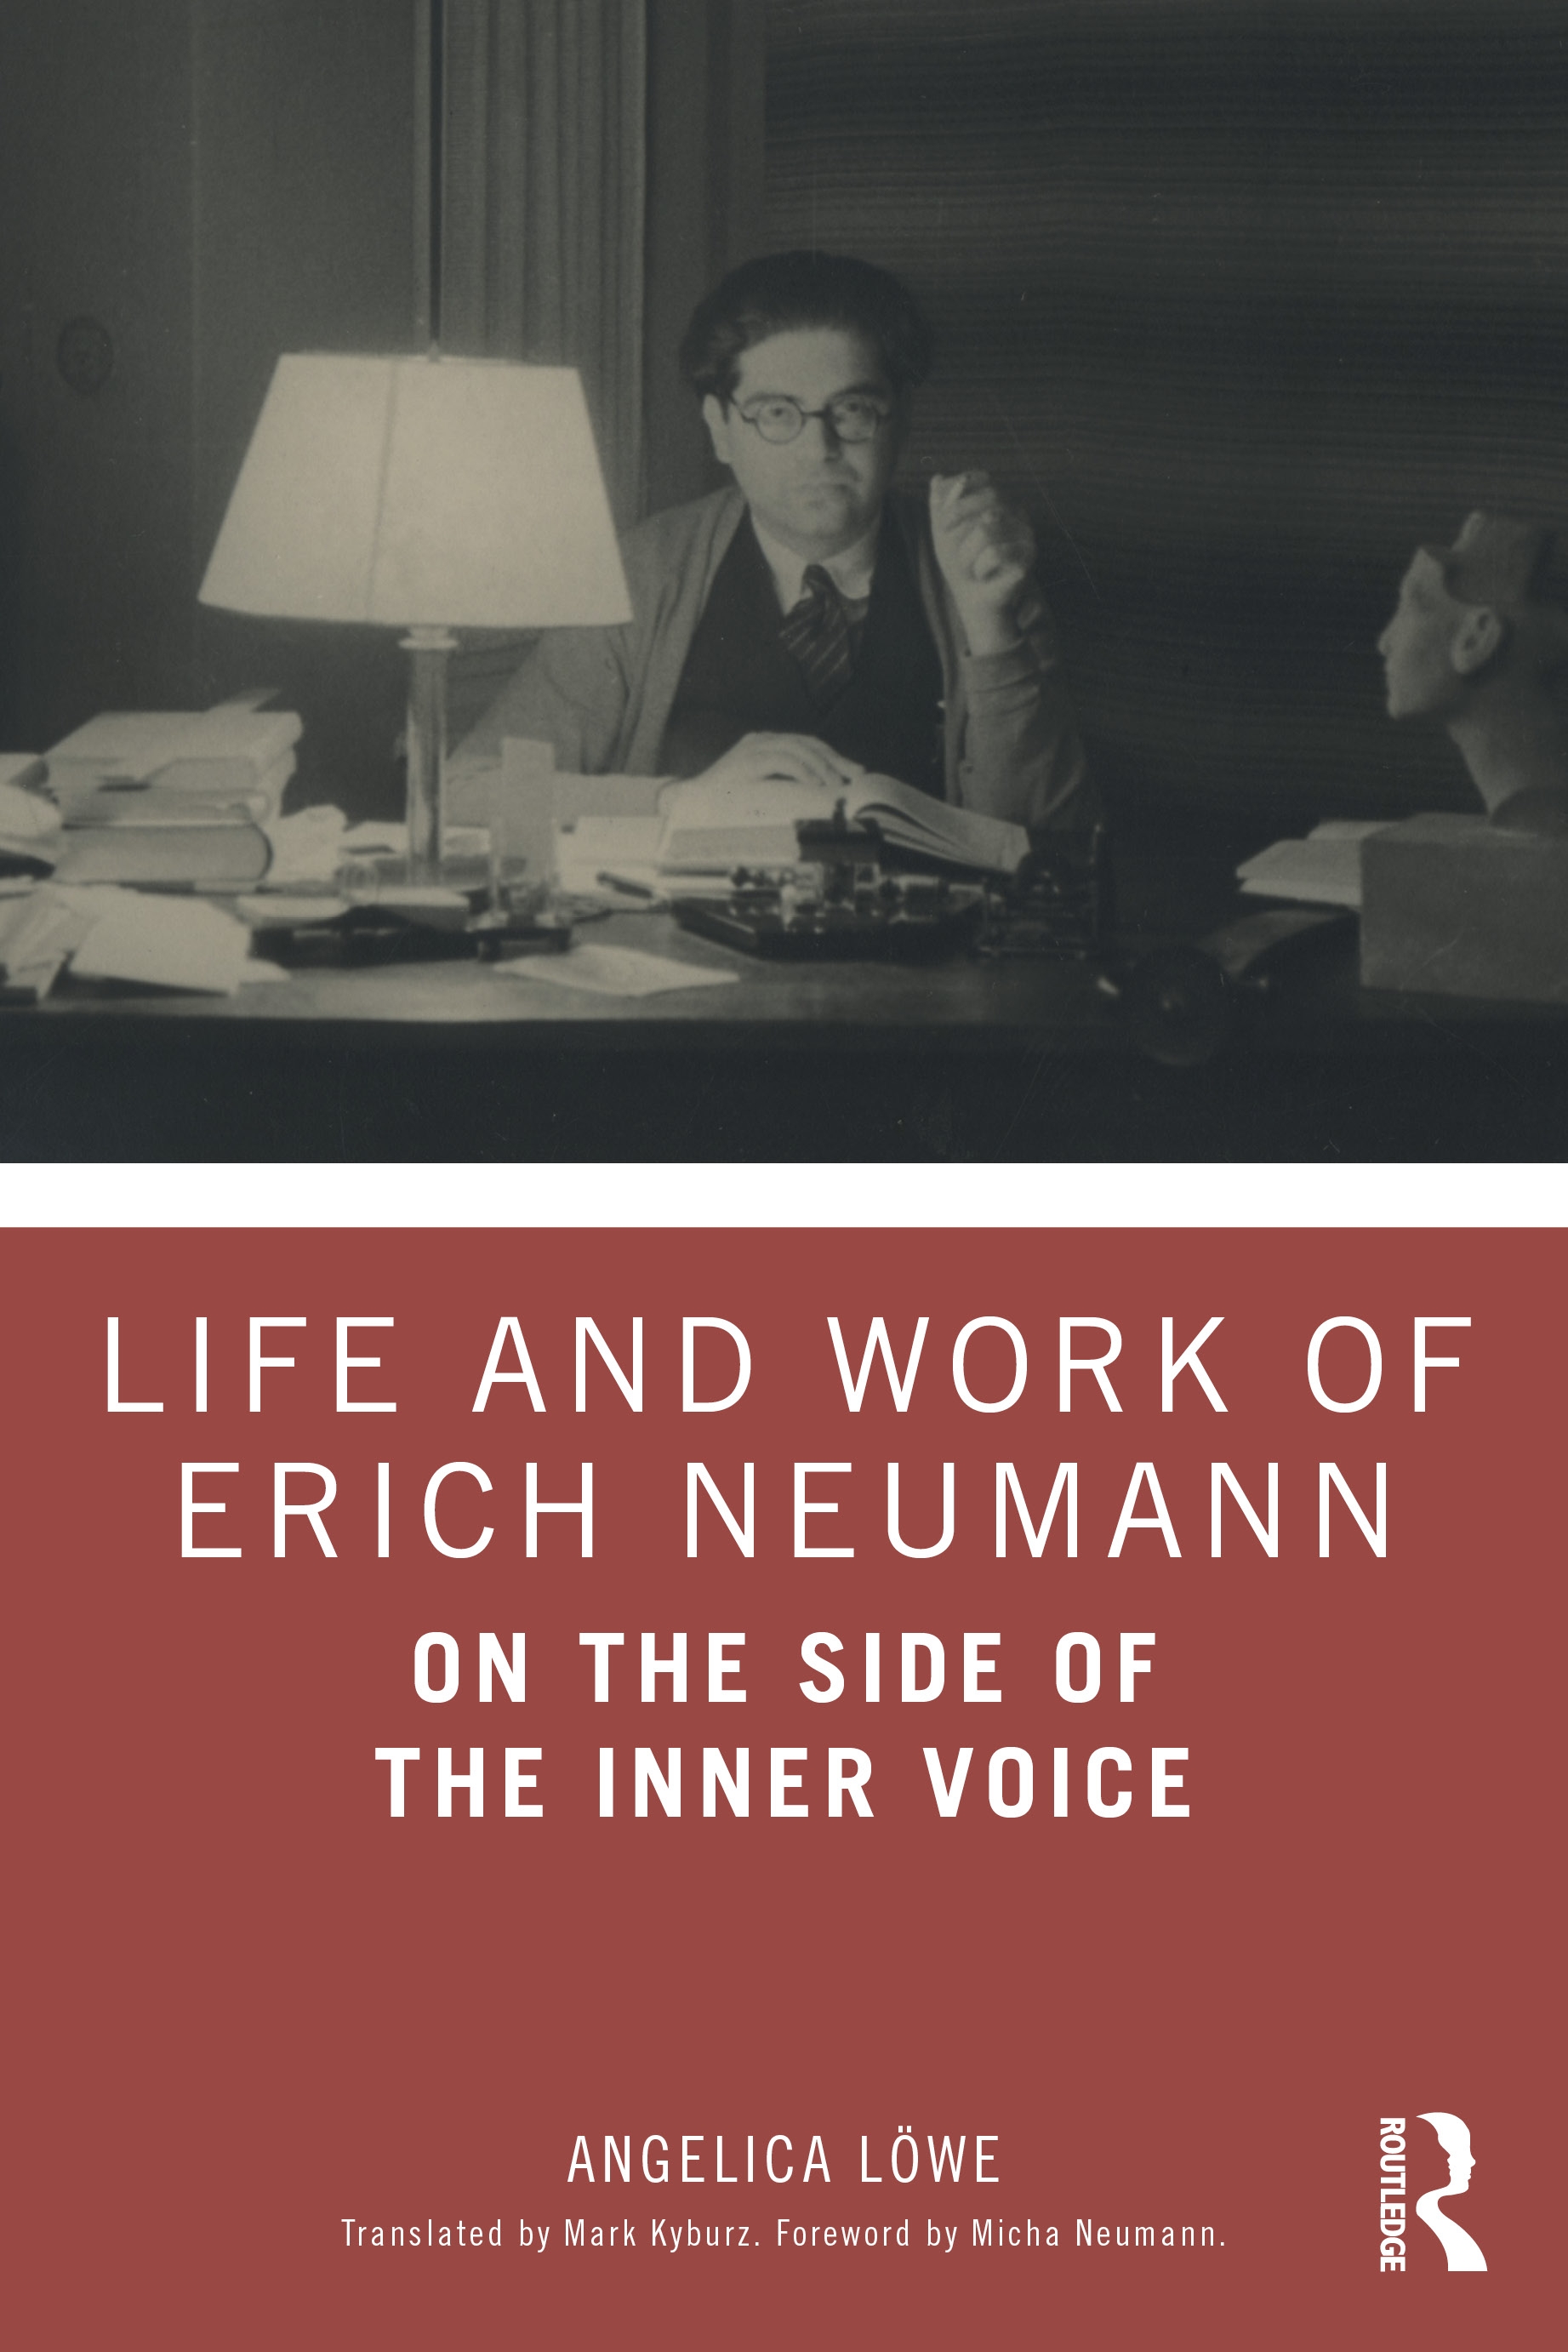 Life and Work of Erich Neumann: On the Side of the Inner Voice